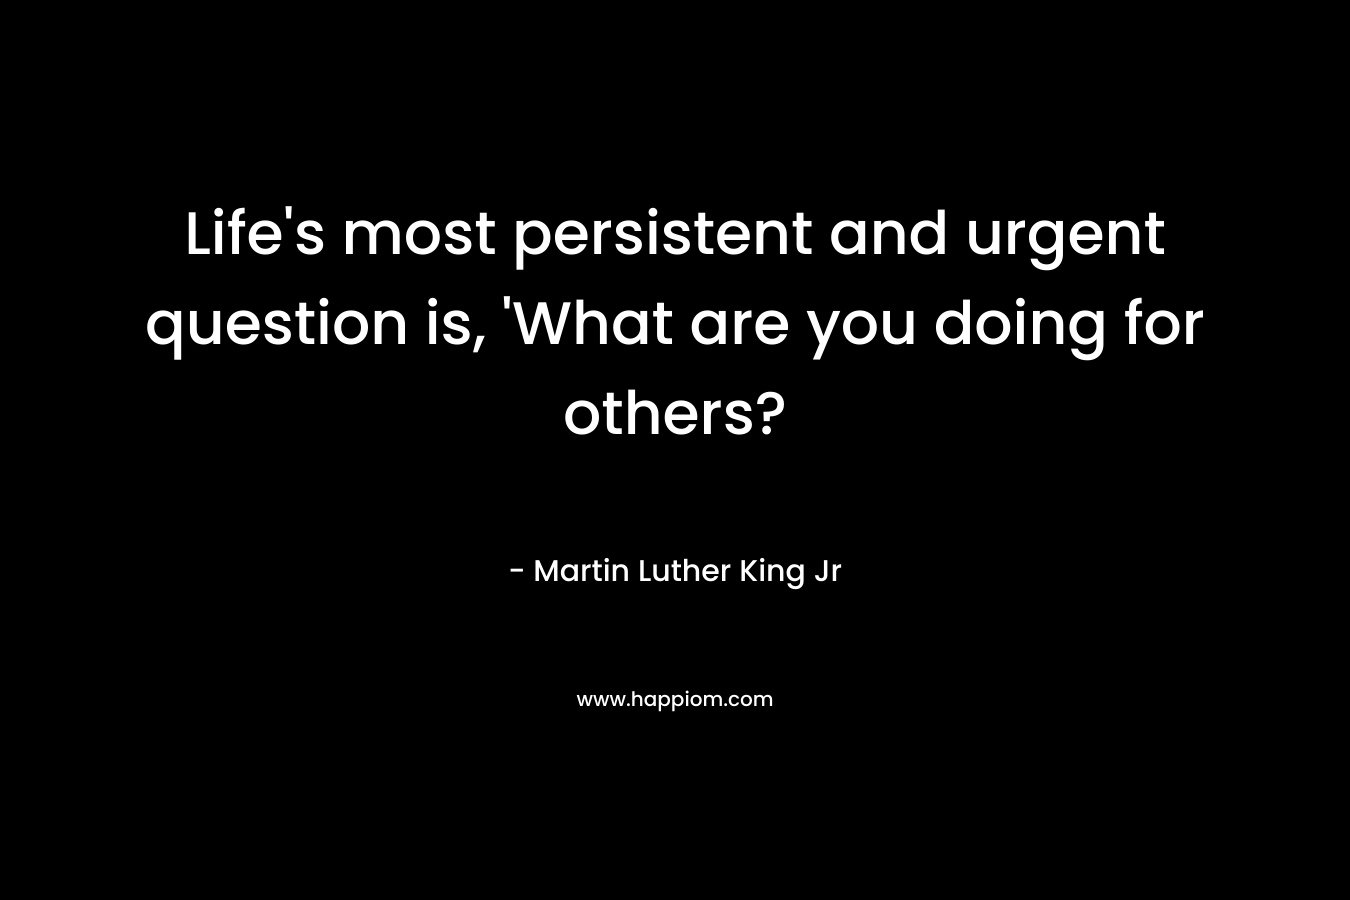 Life's most persistent and urgent question is, 'What are you doing for others?